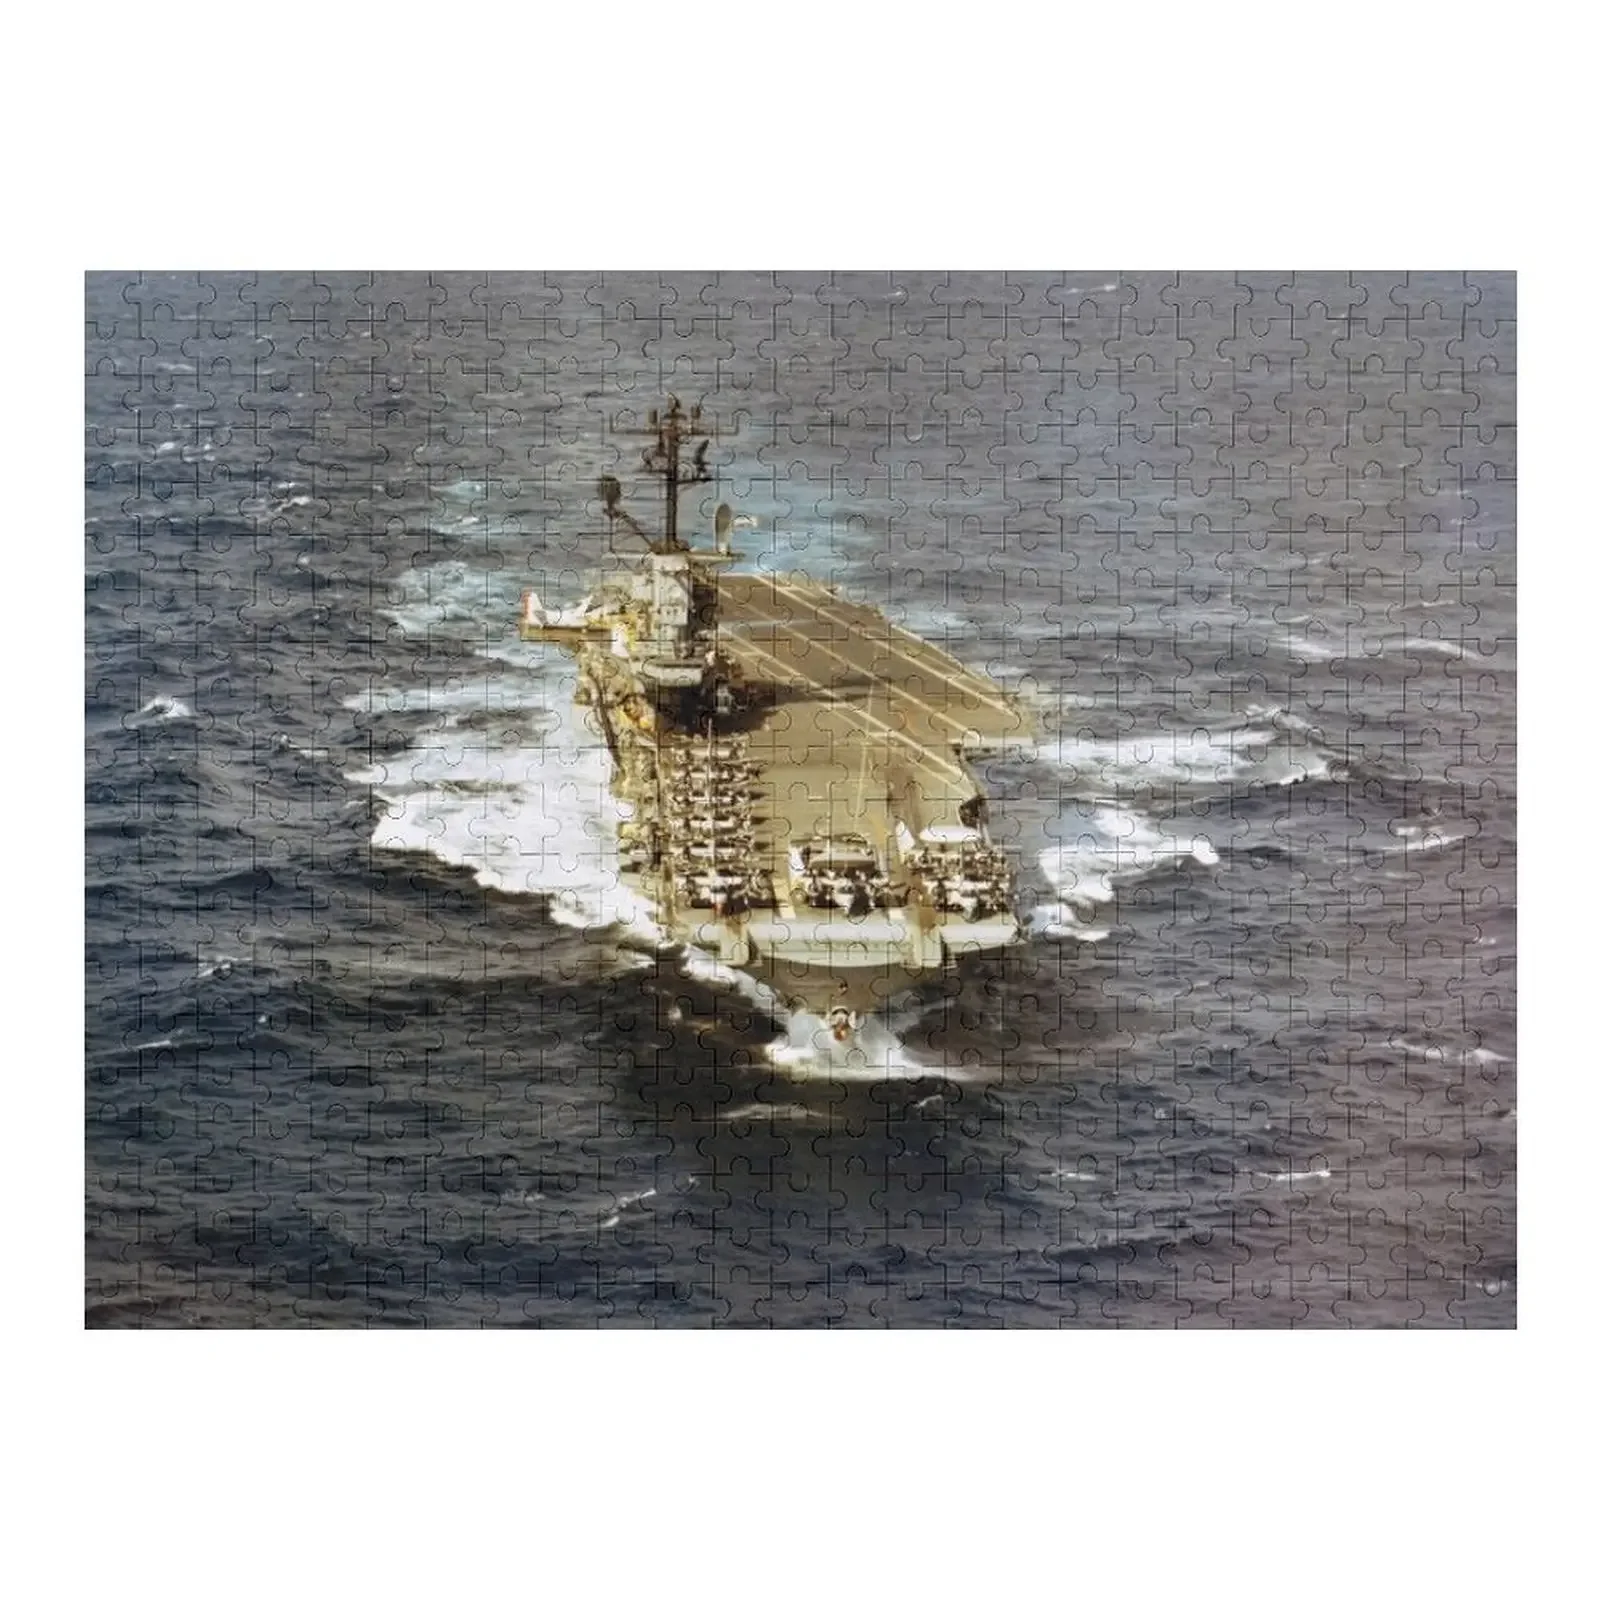 

USS INTREPID (CVS-11) SHIP'S STORE Jigsaw Puzzle Wooden Boxes Jigsaw For Kids Iq Puzzle